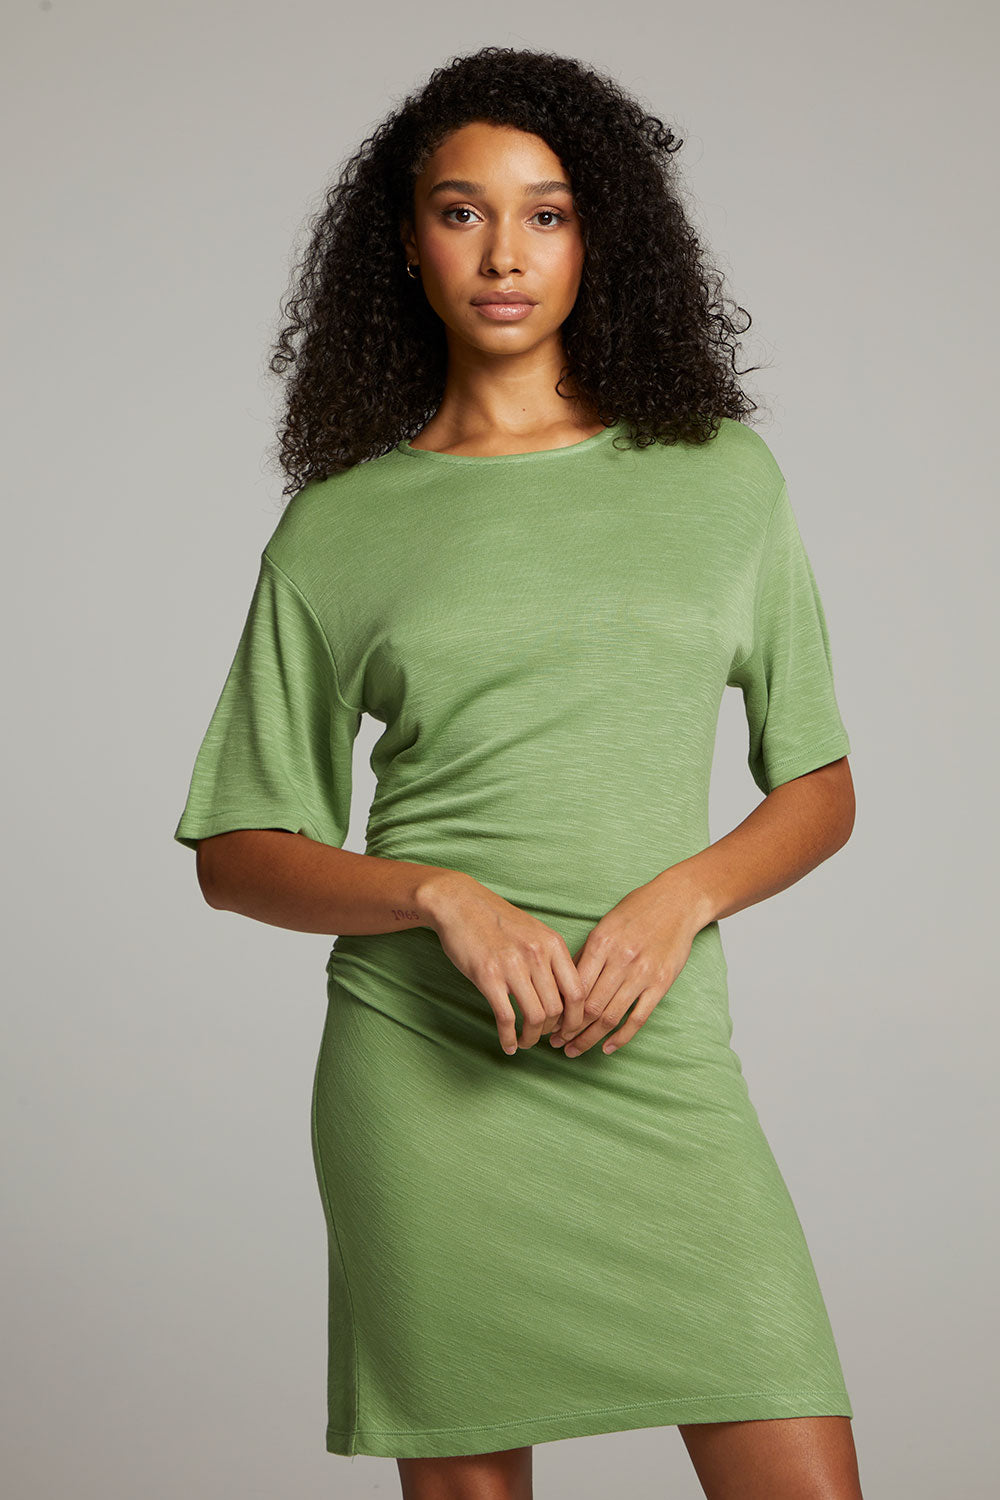 Memory Piquant Green Mini Dress WOMENS chaserbrand